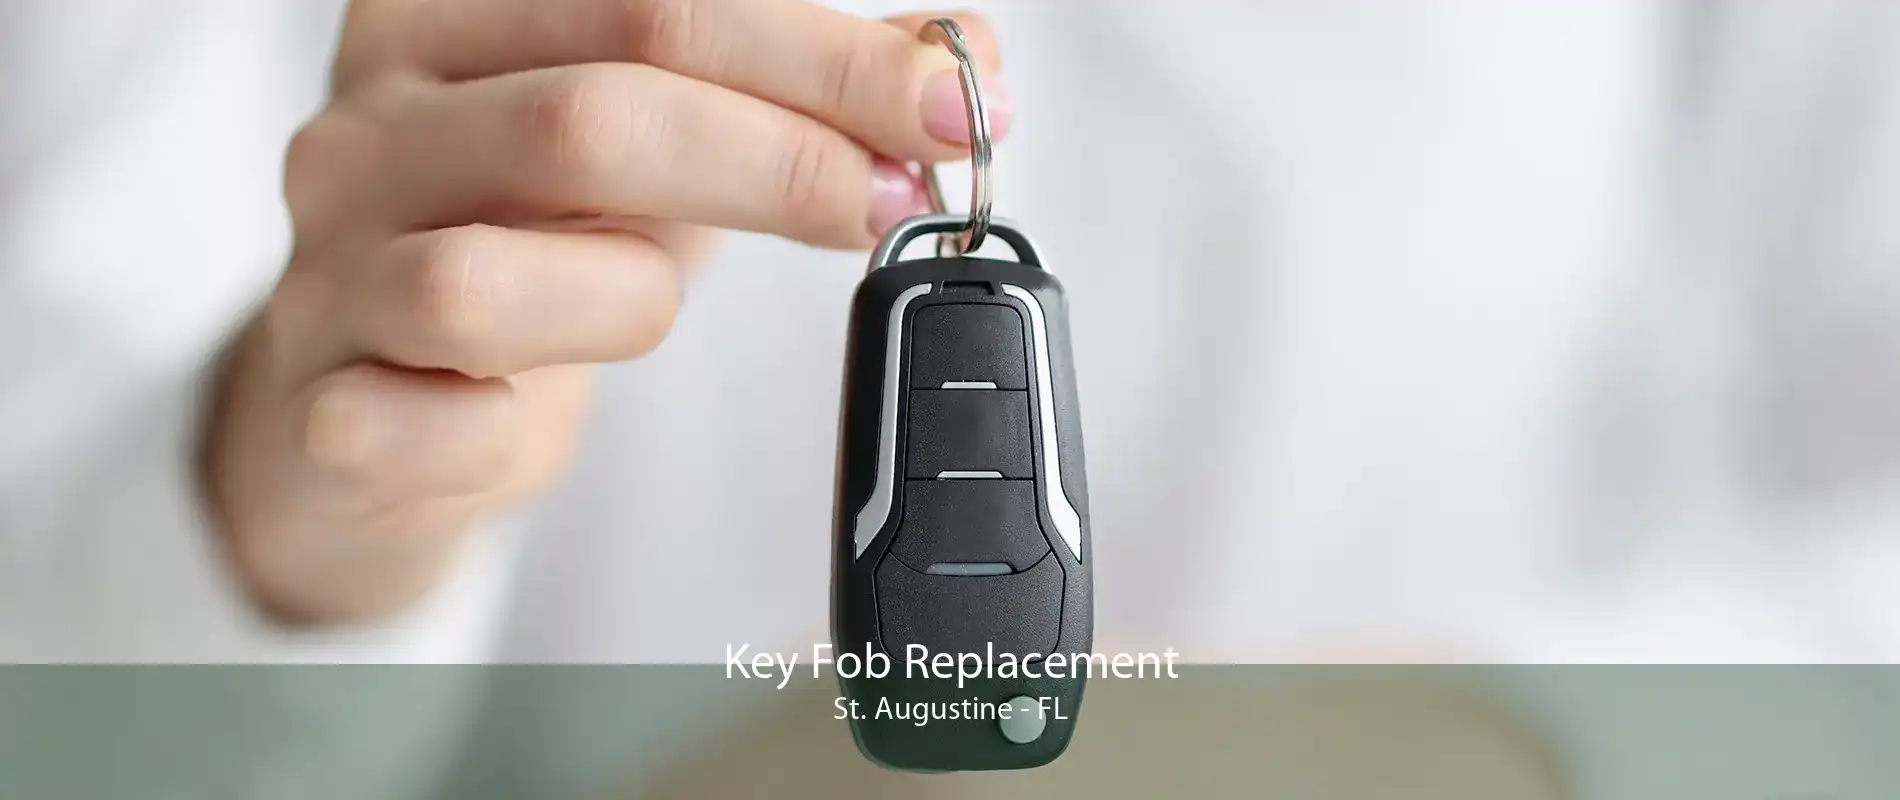 Key Fob Replacement St. Augustine - FL